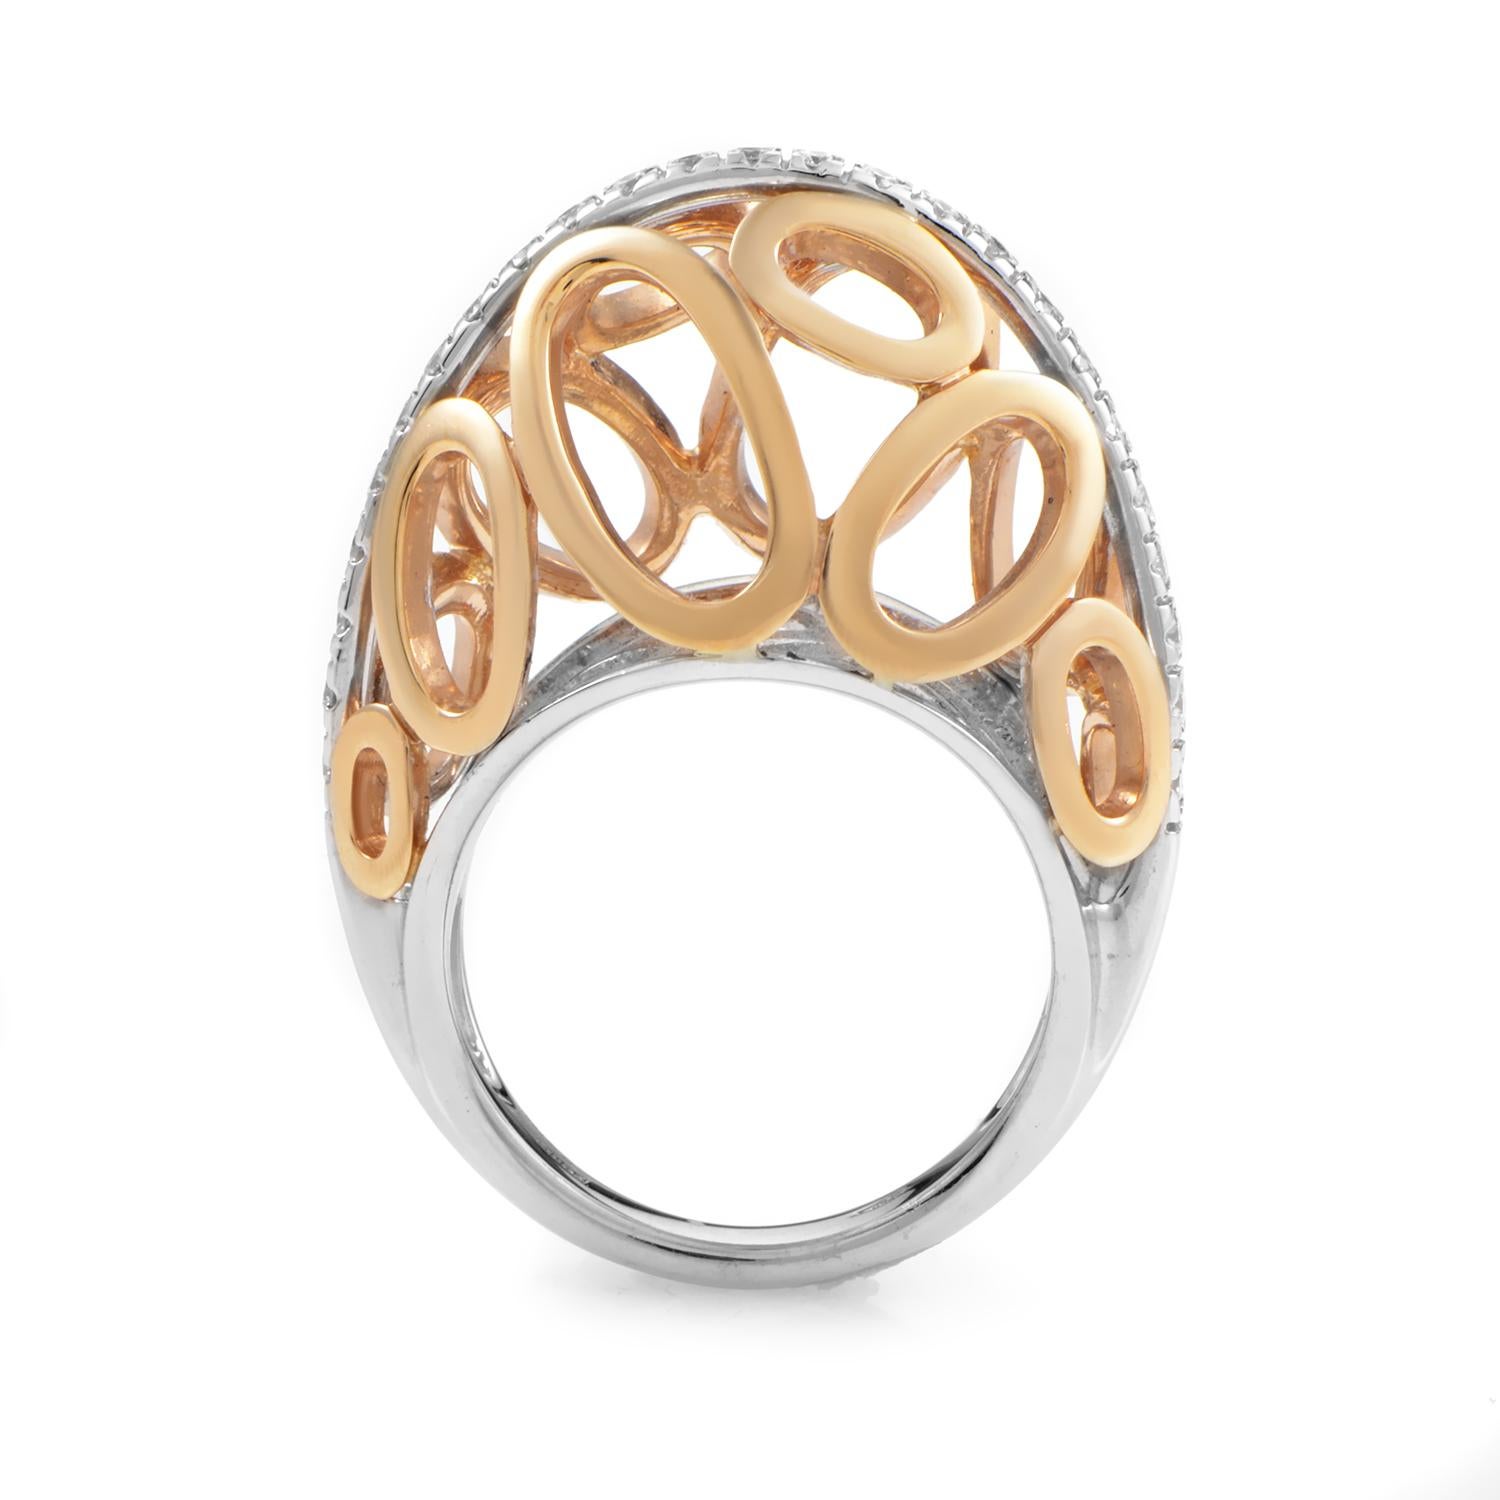 Gorgeous and golden are the perfect words to describe this vivacious ring from Italian brand Oro Trend. The ring is made primarily of 18K white gold and features rose gold oval-shaped accents. Lastly, .40ct of white diamonds add a sublime shine to